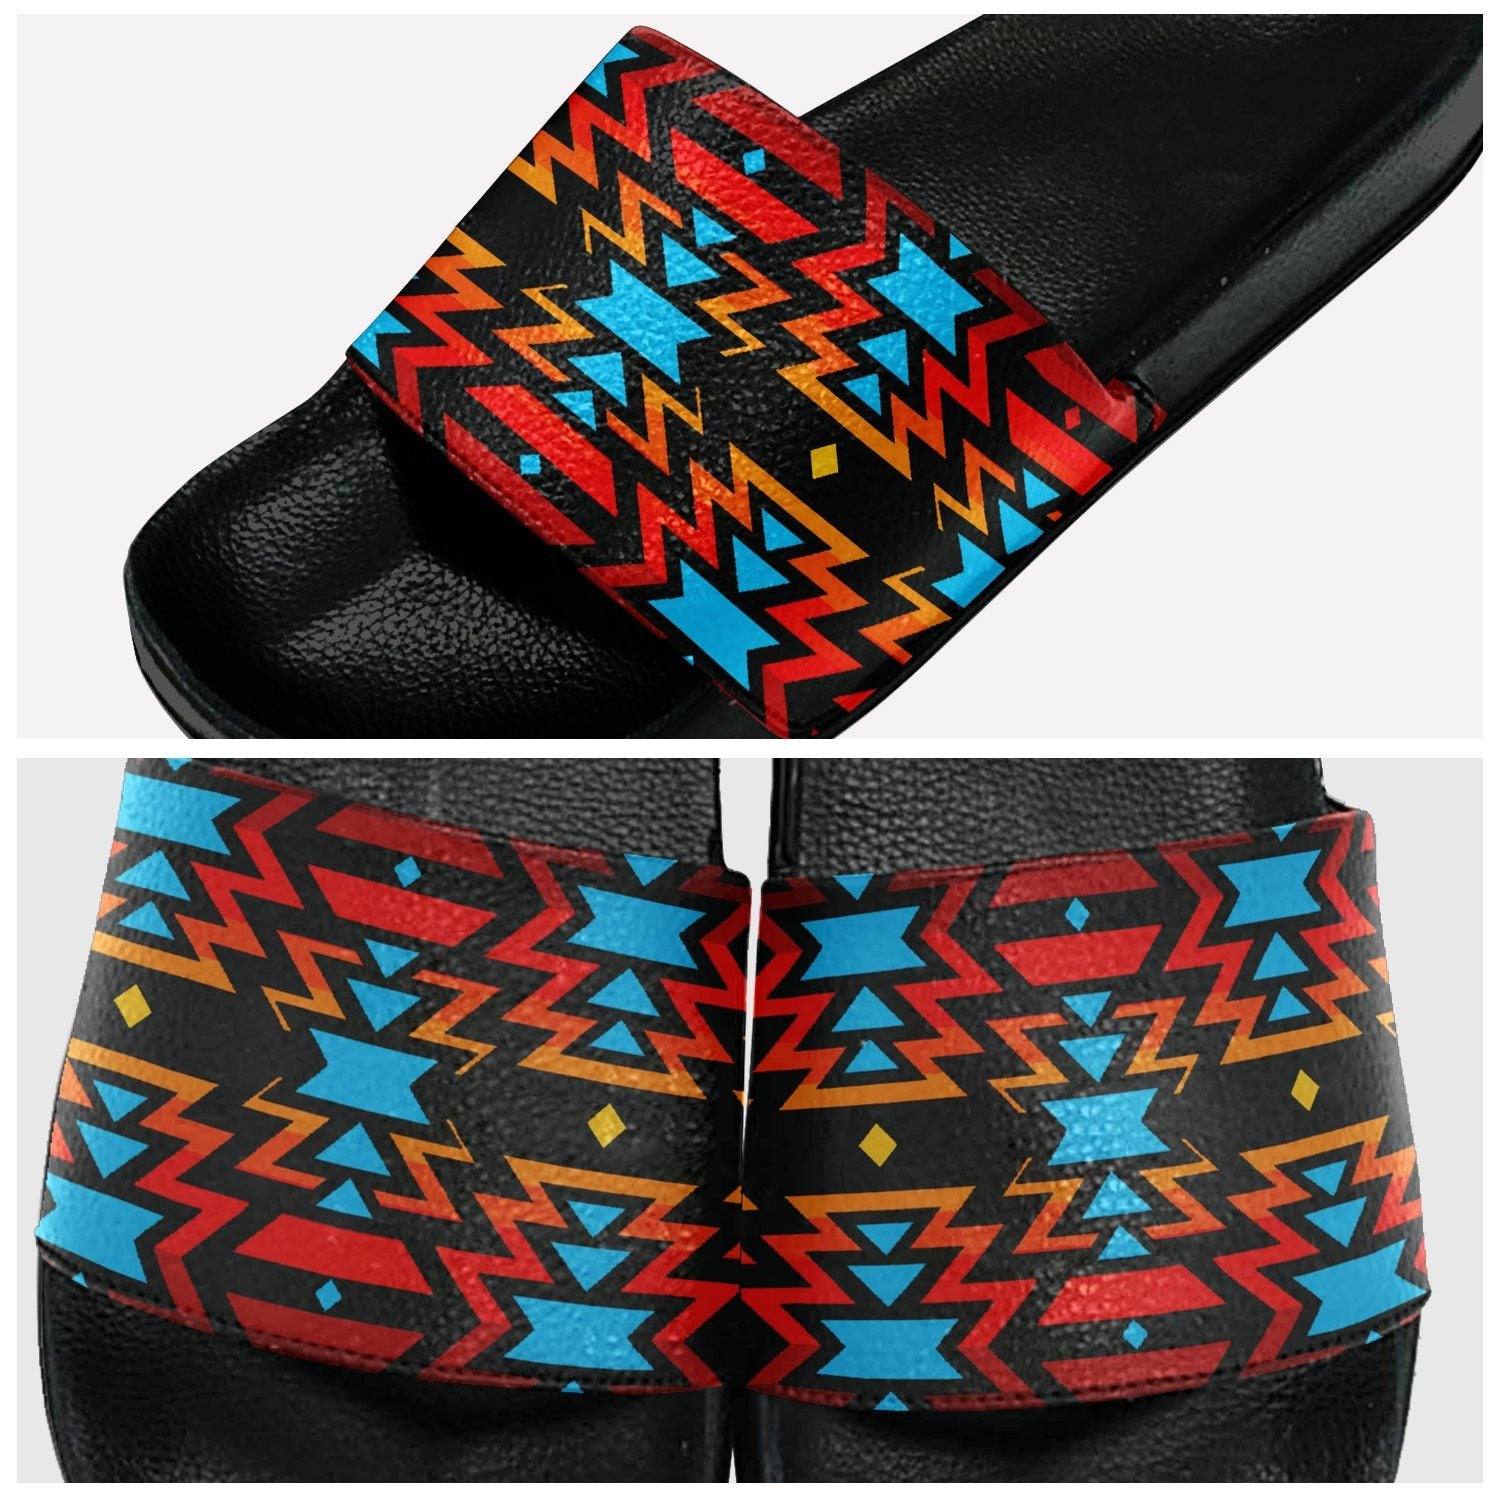 Black Fire and Turquoise Slide Sandals 49 Dzine 